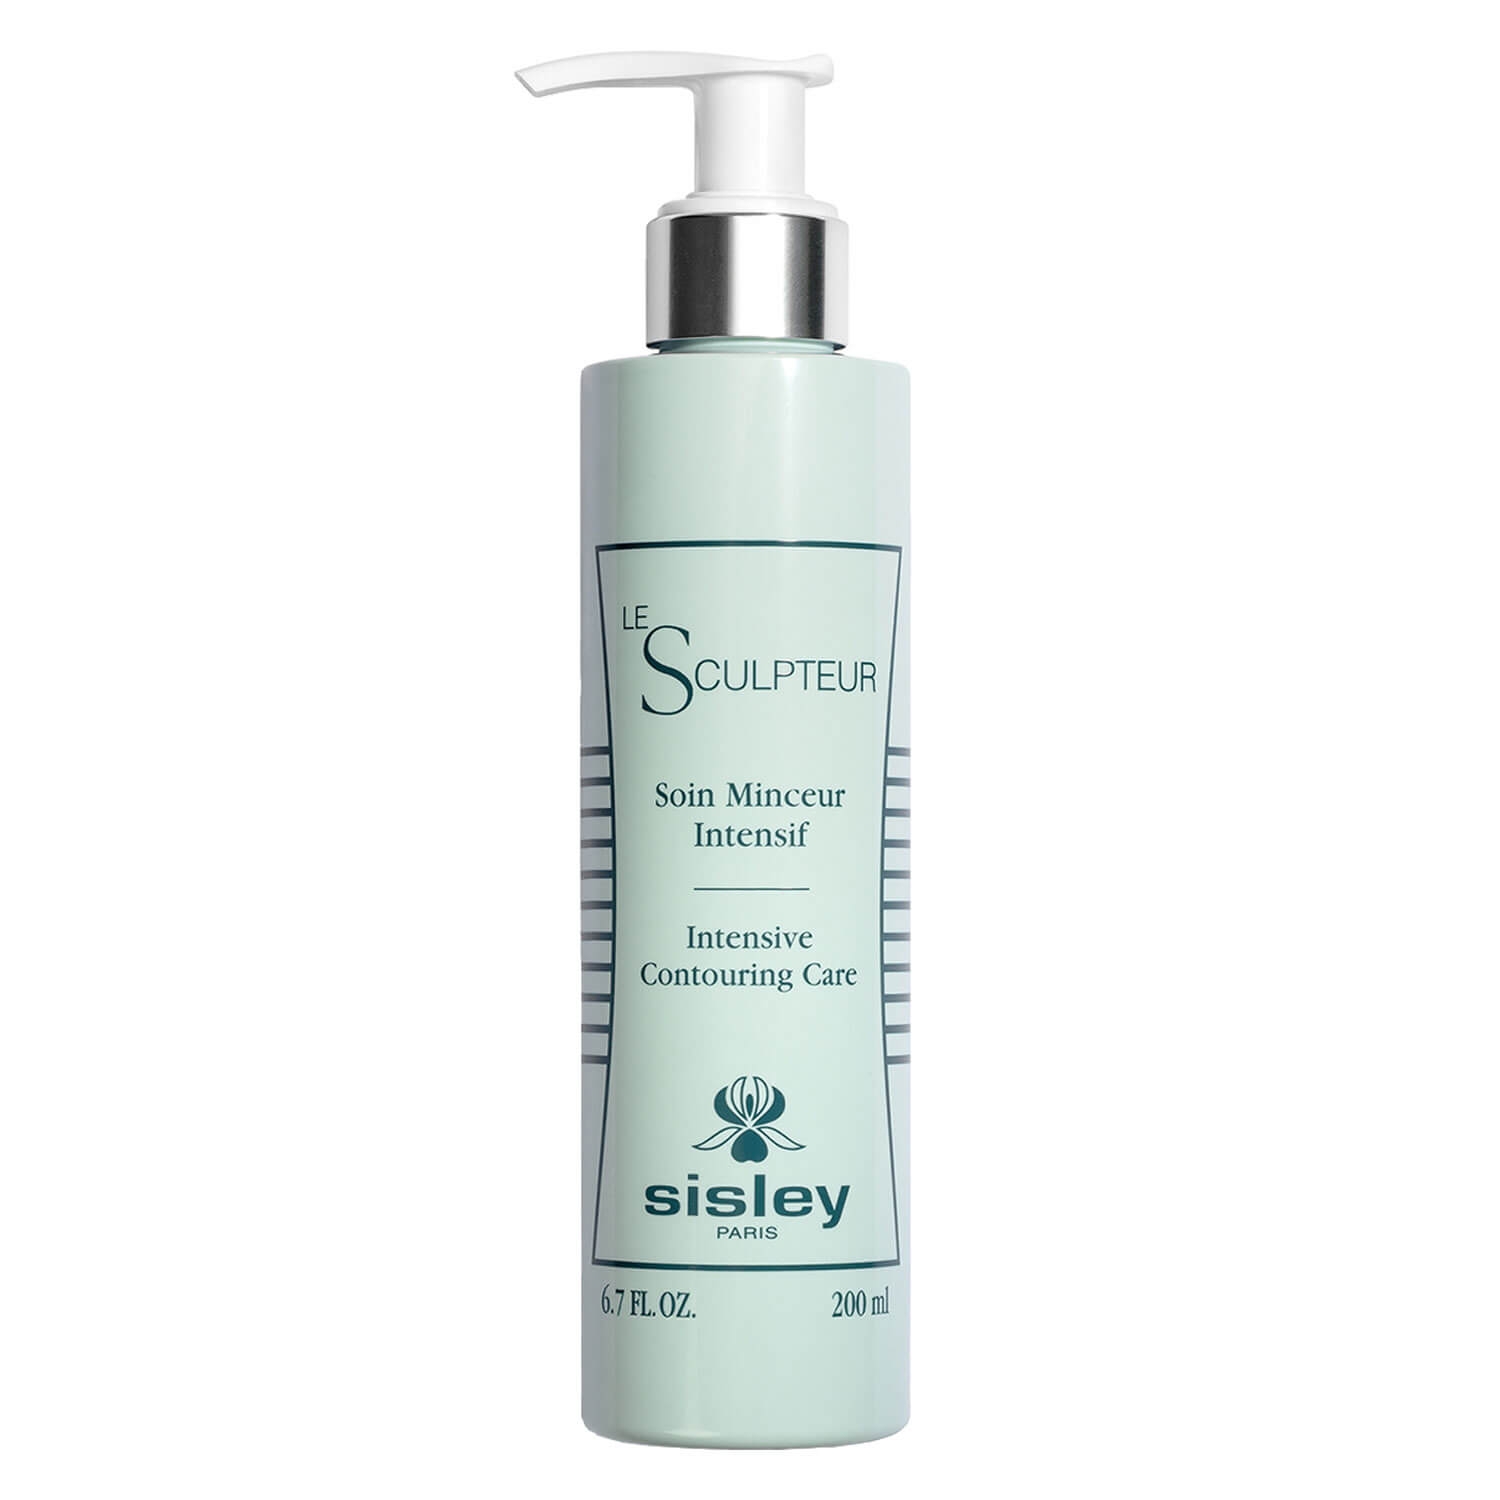 Product image from Sisley Skincare - Le Sculpteur Soin Minceur Intensif